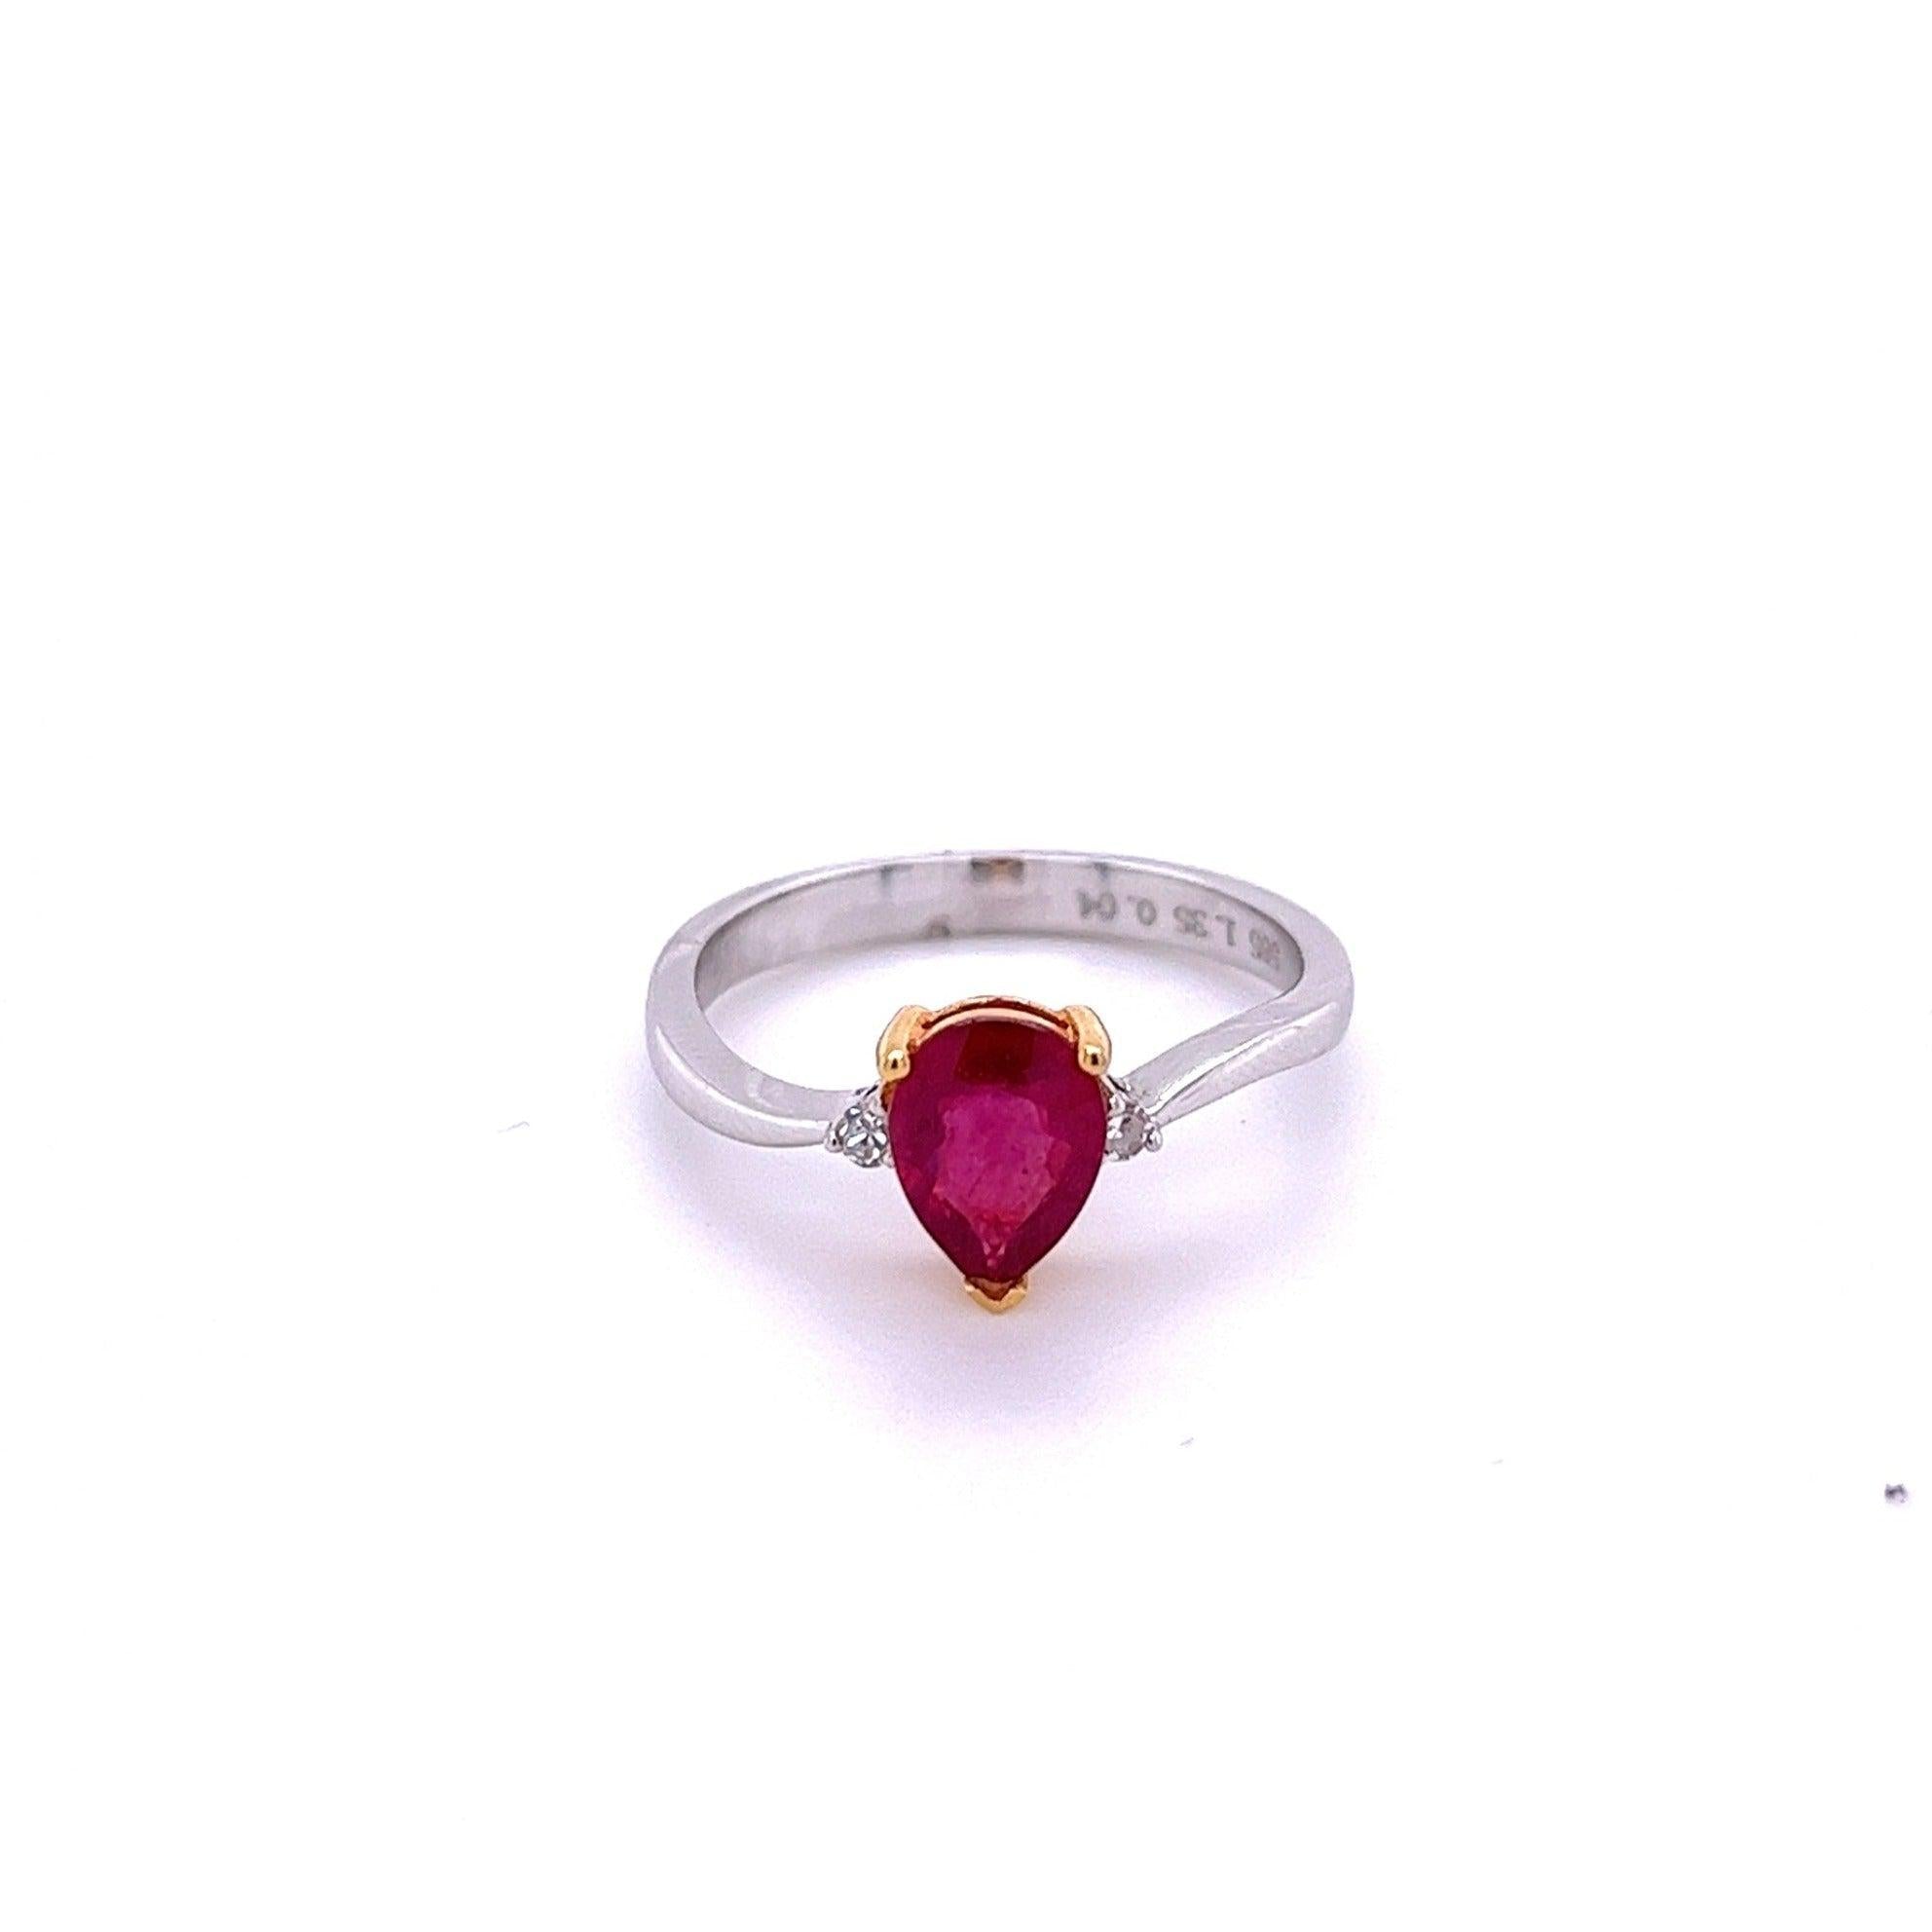 1.35 Carat Pear Cut Natural Ruby and Diamonds in 14k white gold Curved Ring